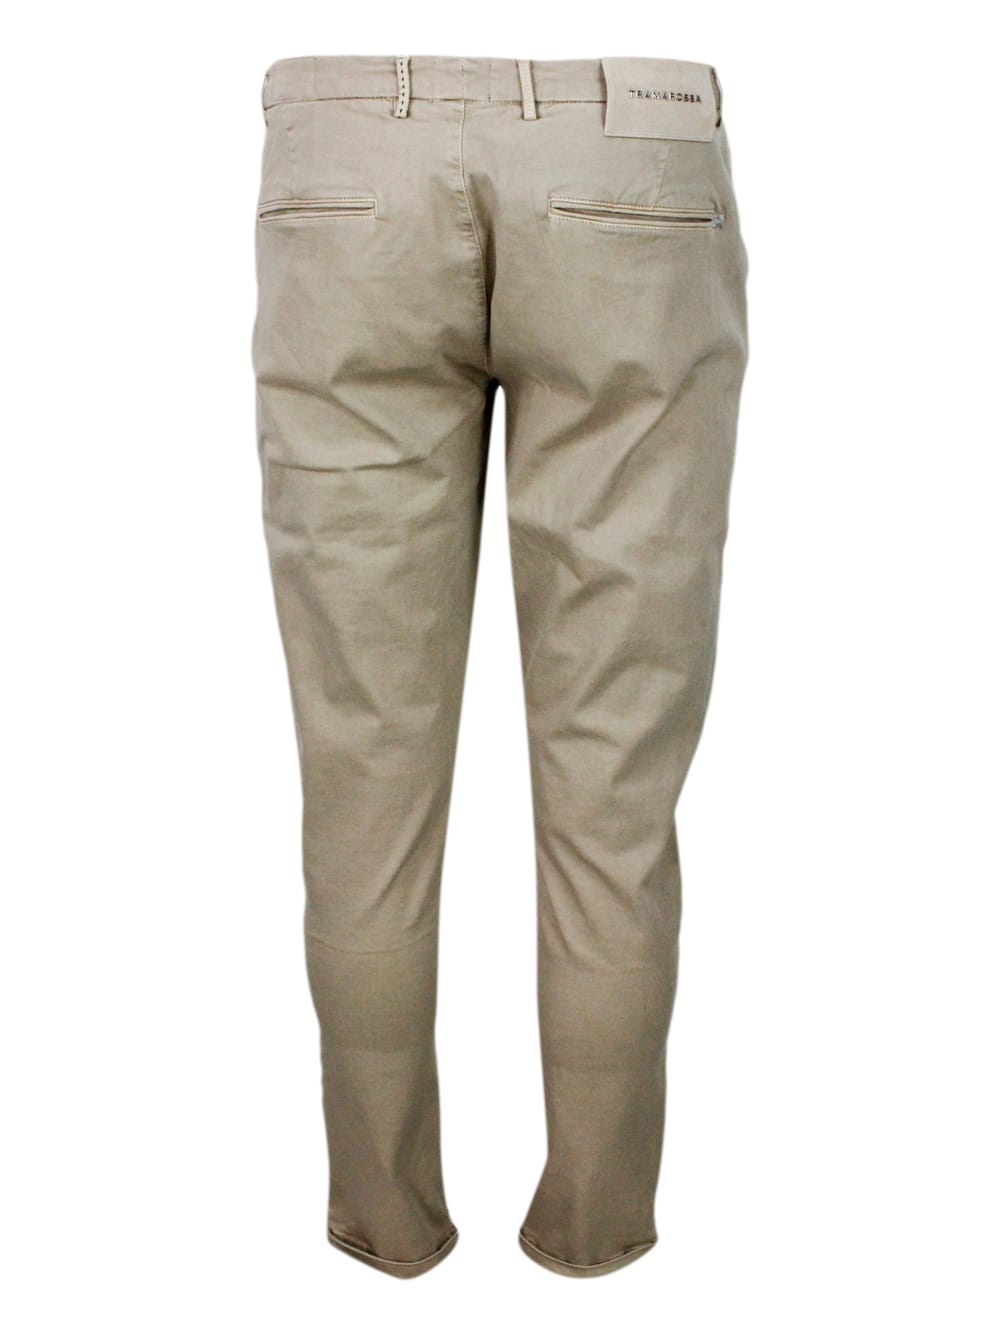 Shop Sartoria Tramarossa Luis Trousers With Chino Pockets In Stretch Elastic Cotton With Tone-on-tone Tailored Stitching And  In Sahara Desert